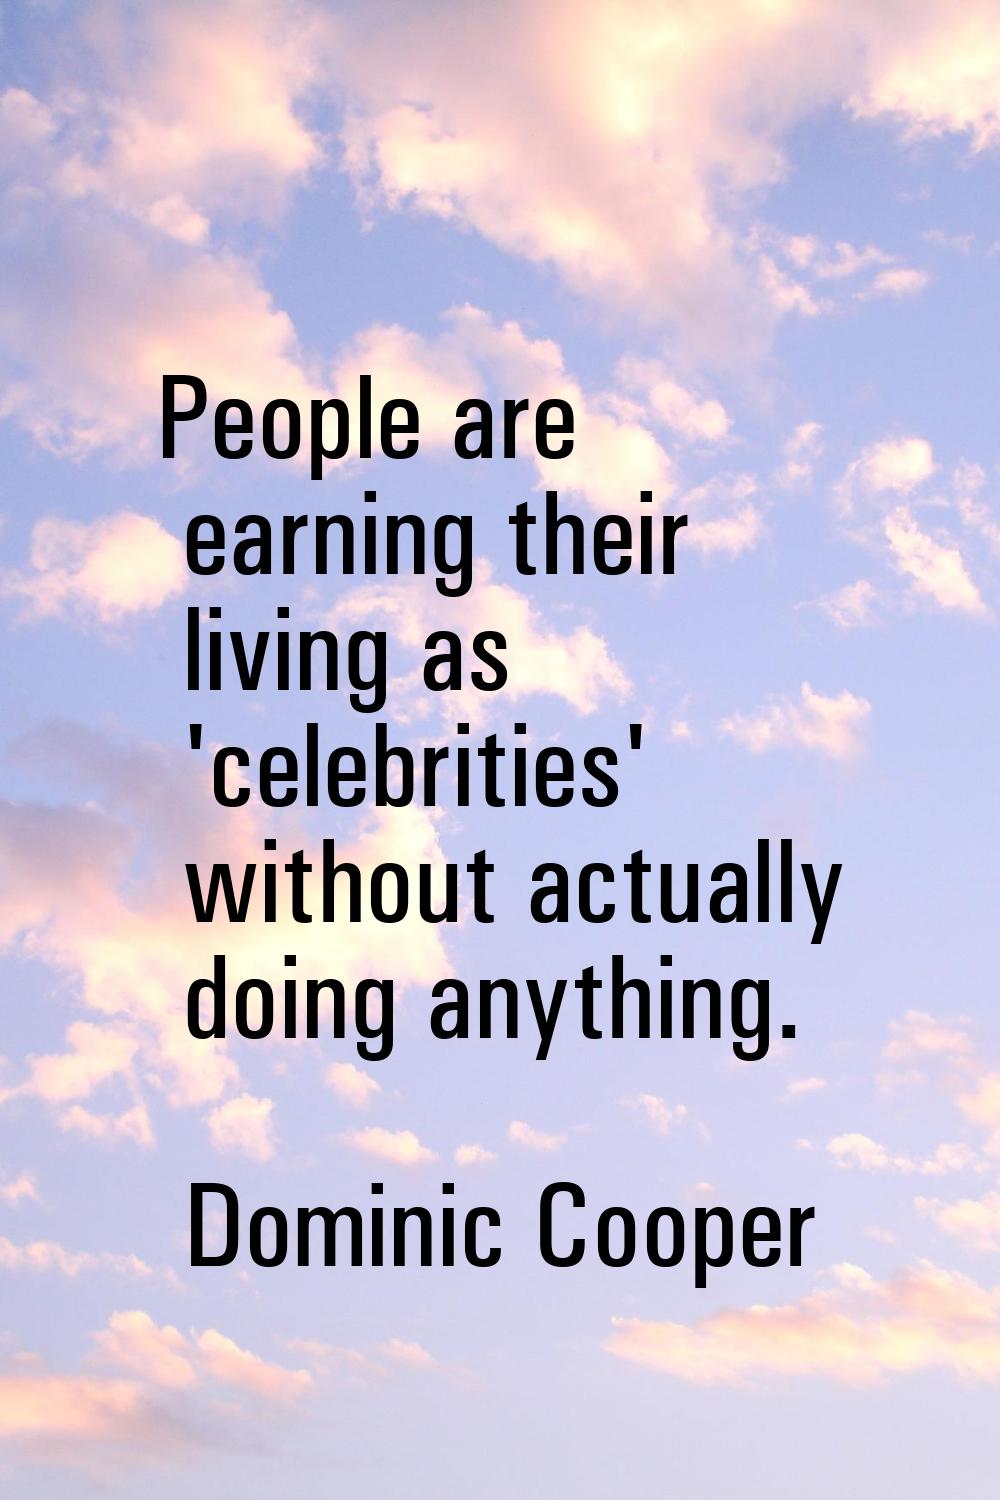 People are earning their living as 'celebrities' without actually doing anything.